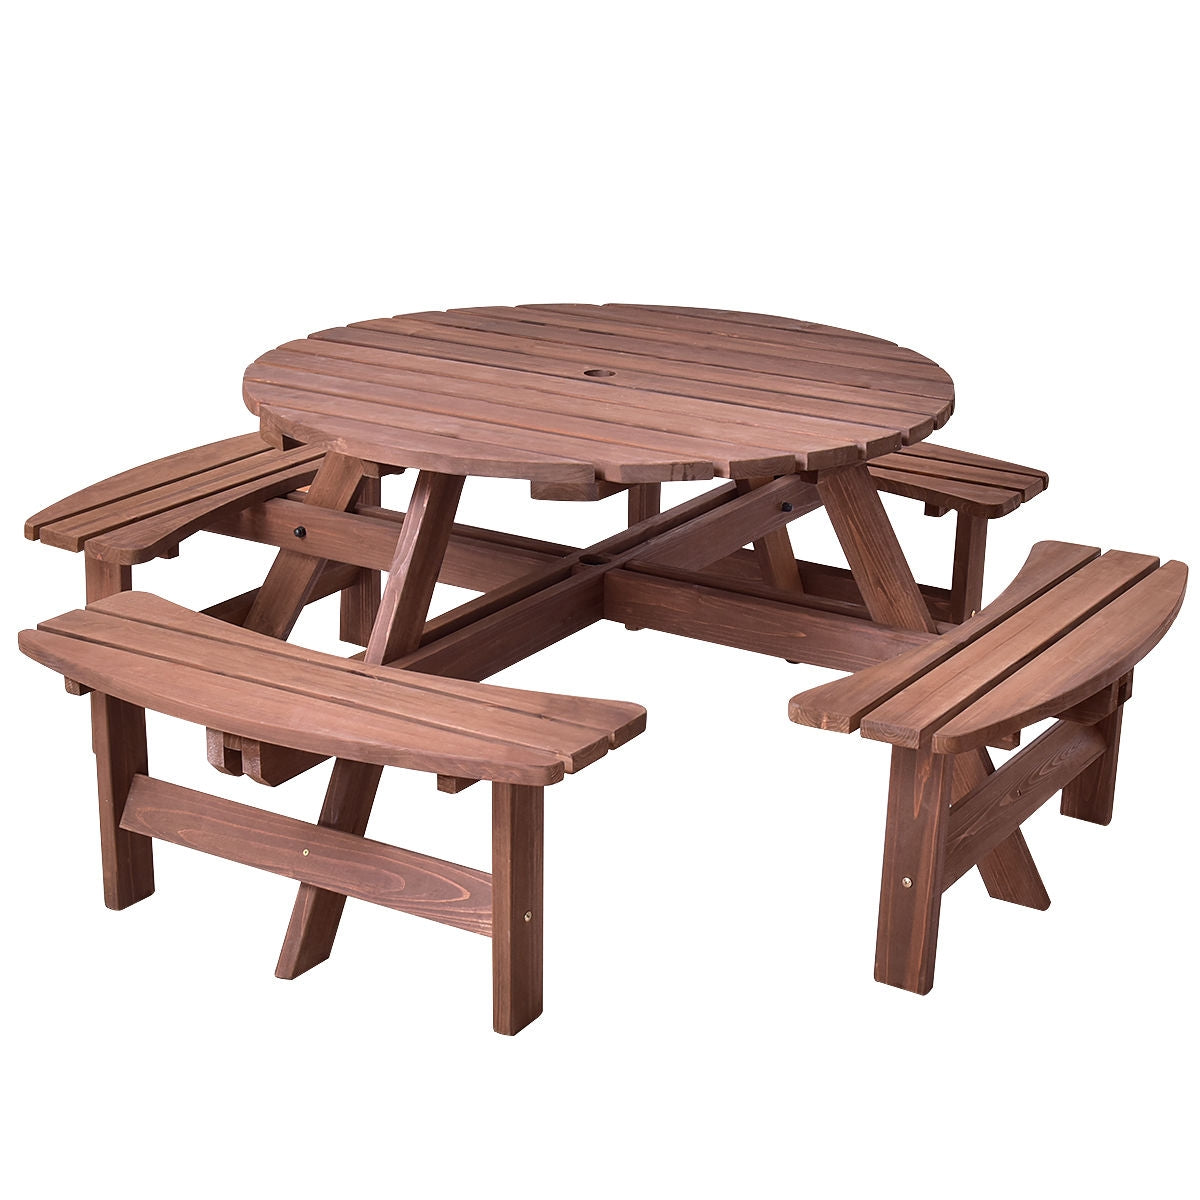 8-Person Wooden Dining Table Benches Set for Picnic